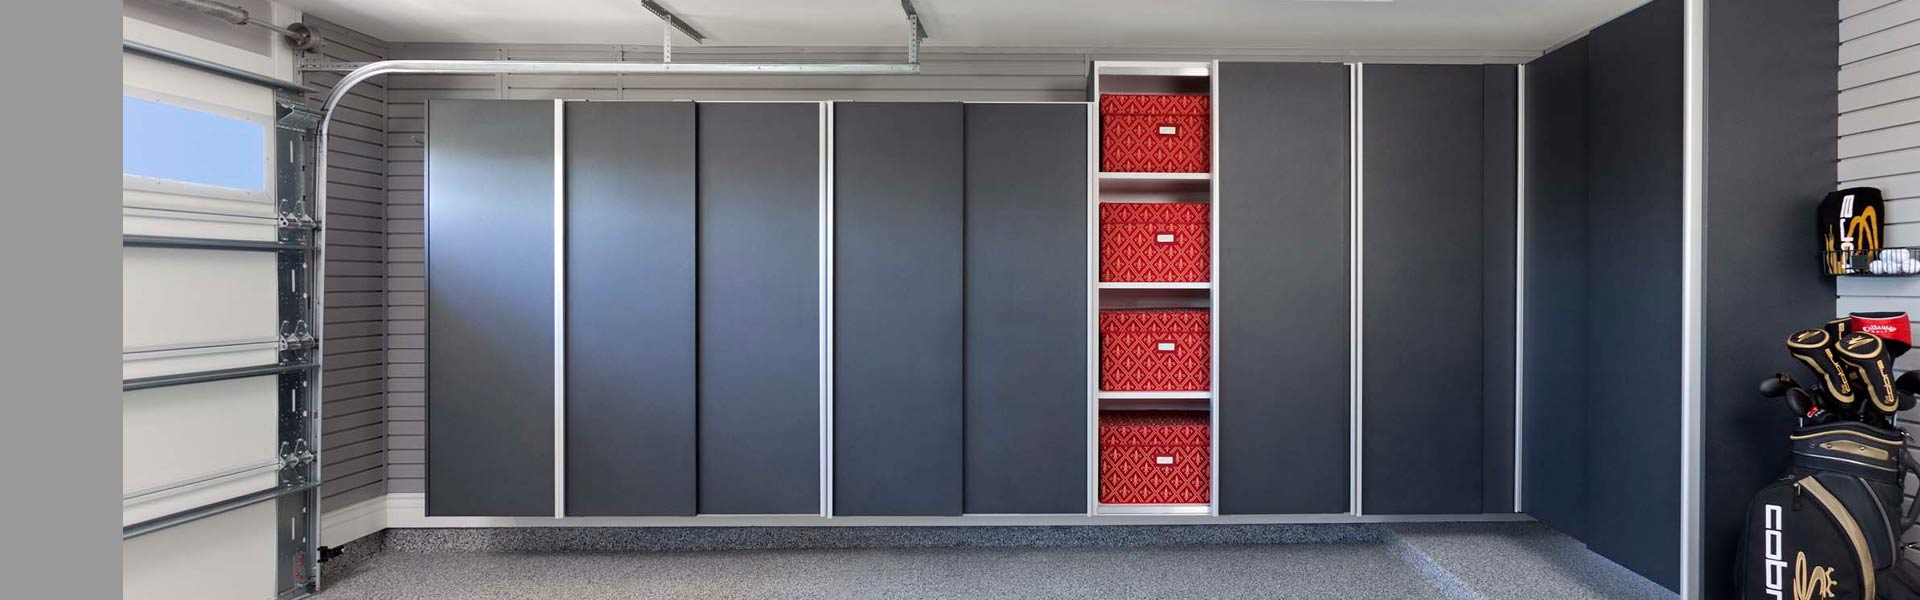 Garage storage system with sliding doors and slatwall